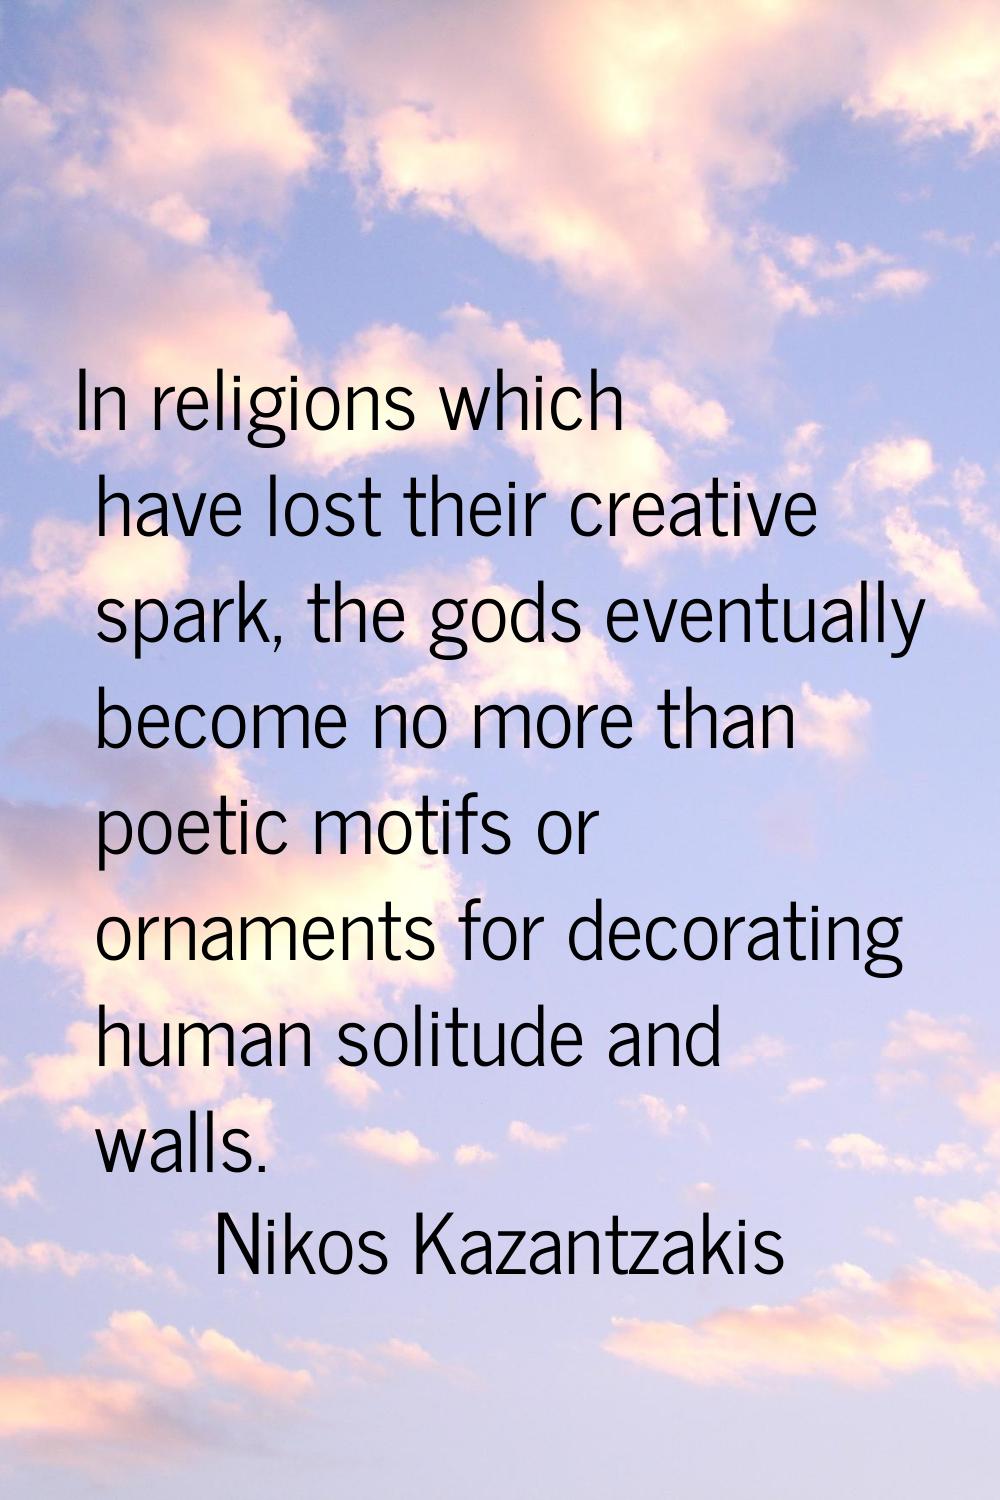 In religions which have lost their creative spark, the gods eventually become no more than poetic m